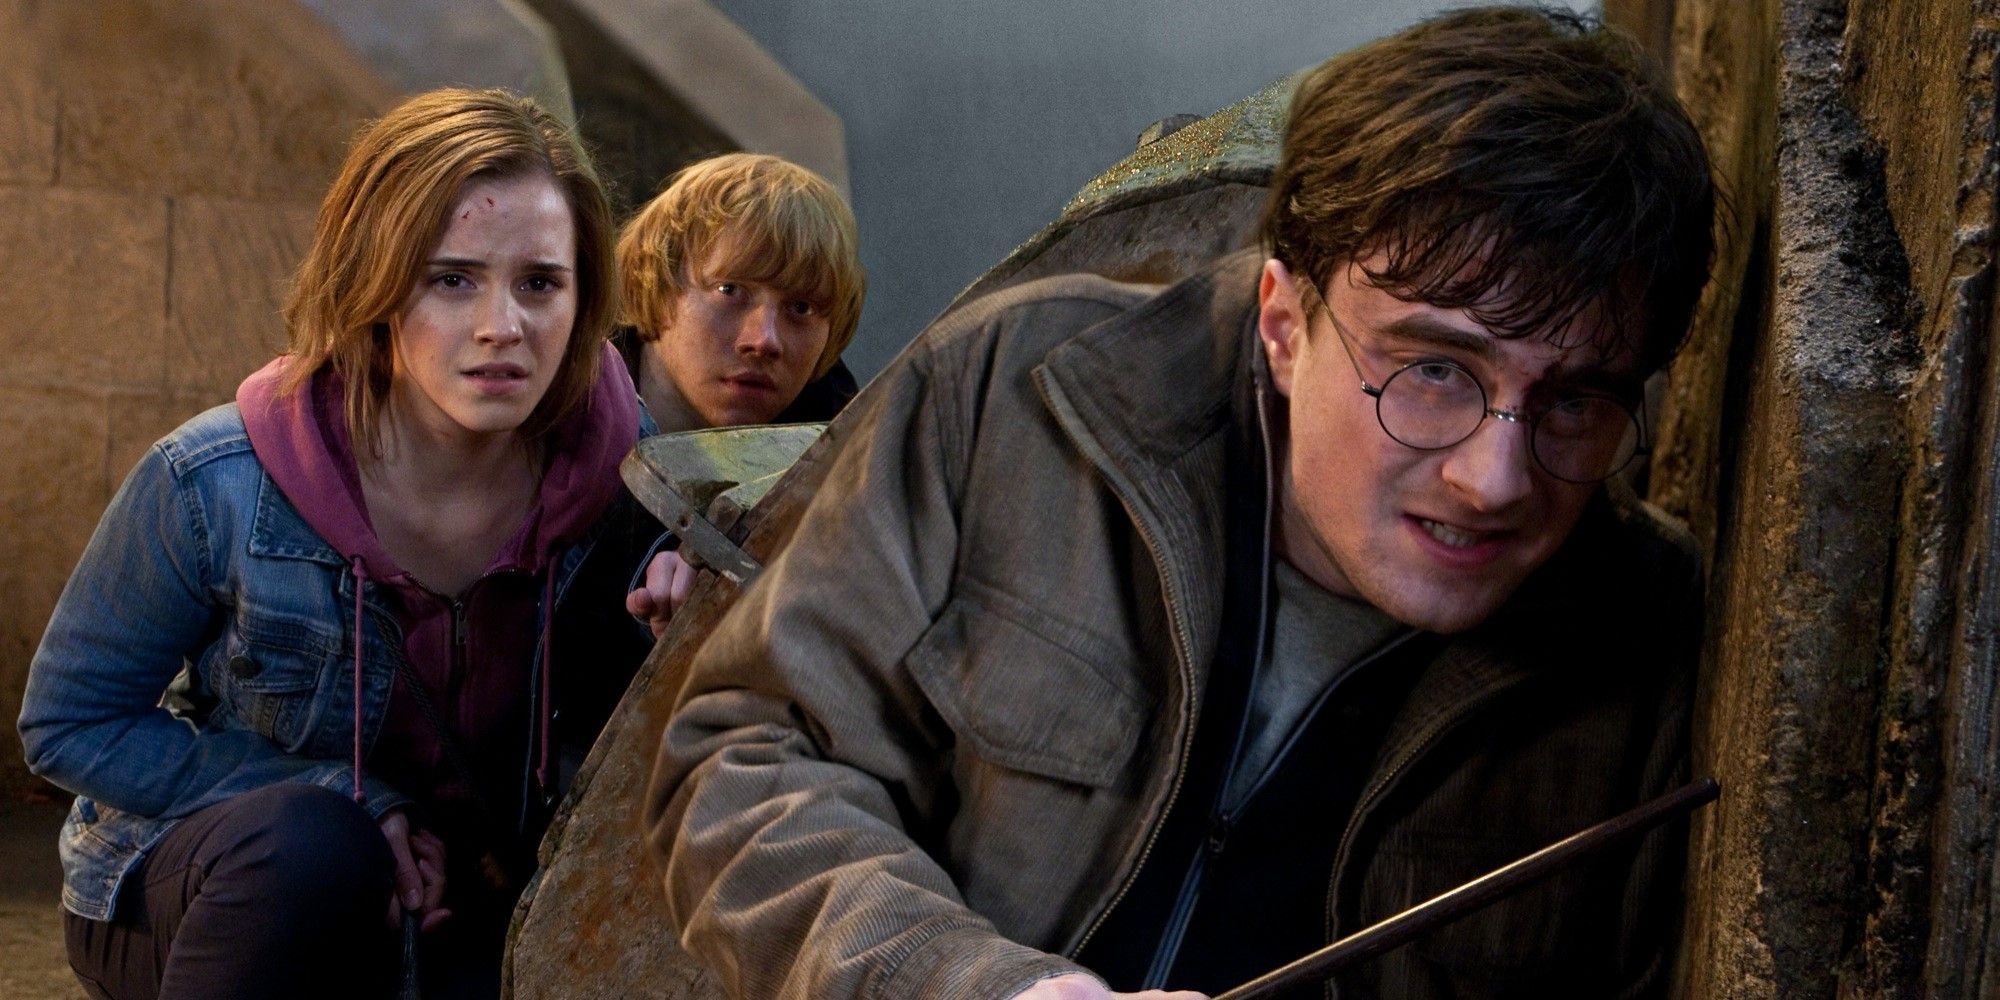 Hermoine, Ron, and Harry in 'Harry Potter and the Deathly Hallows Part 2